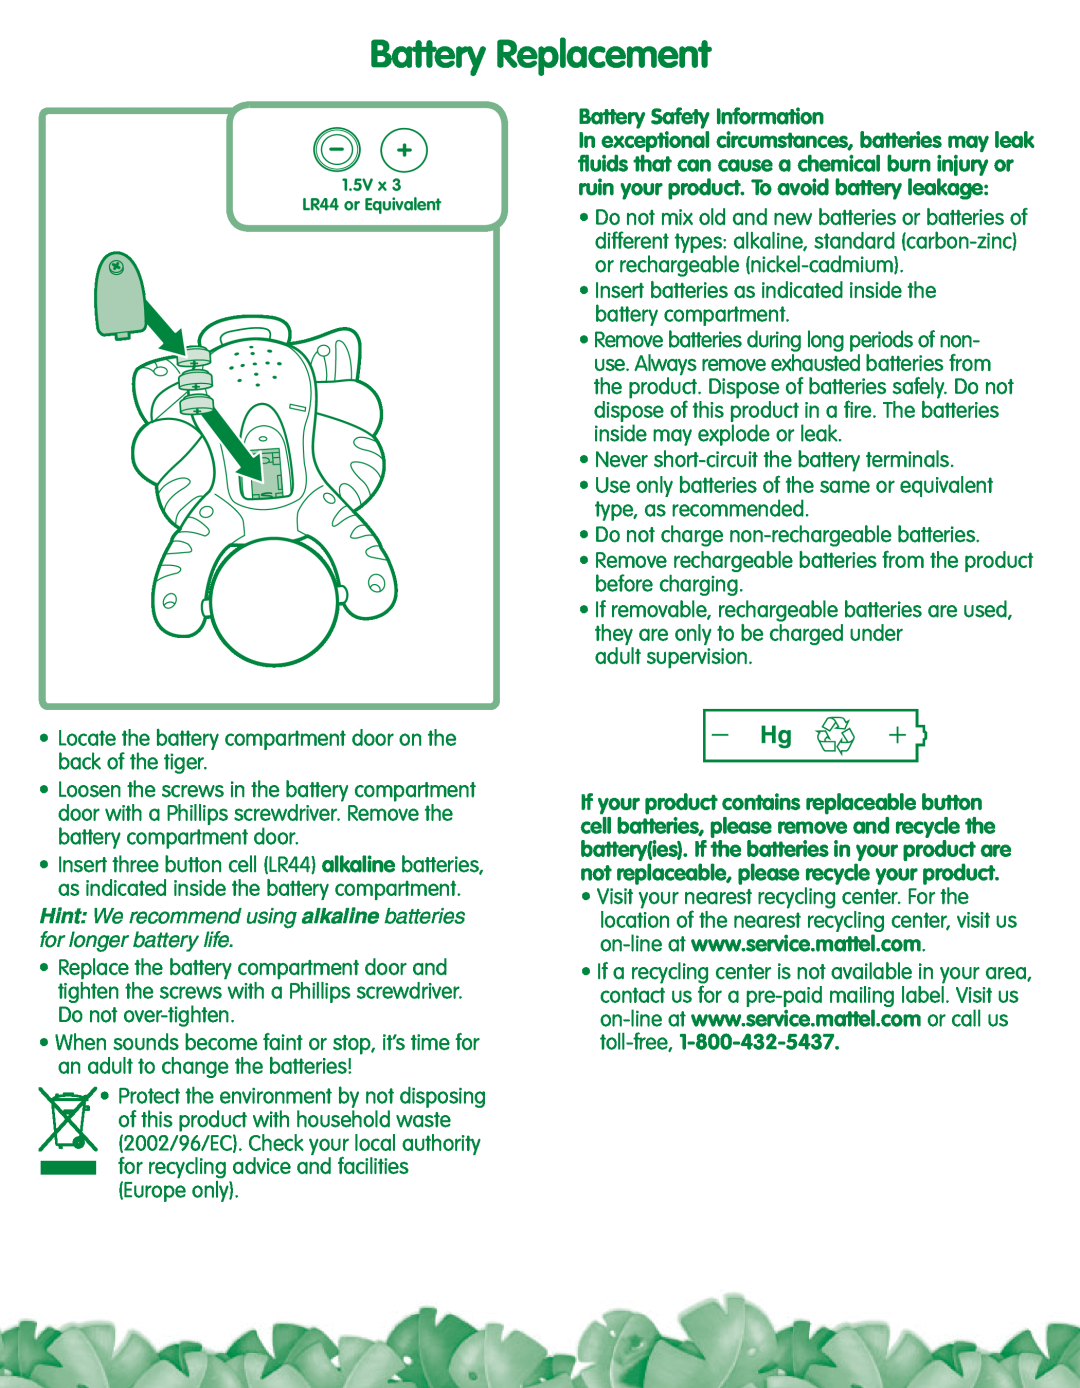 Fisher-Price L1664 instruction sheet Battery Replacement, Battery Safety Information 